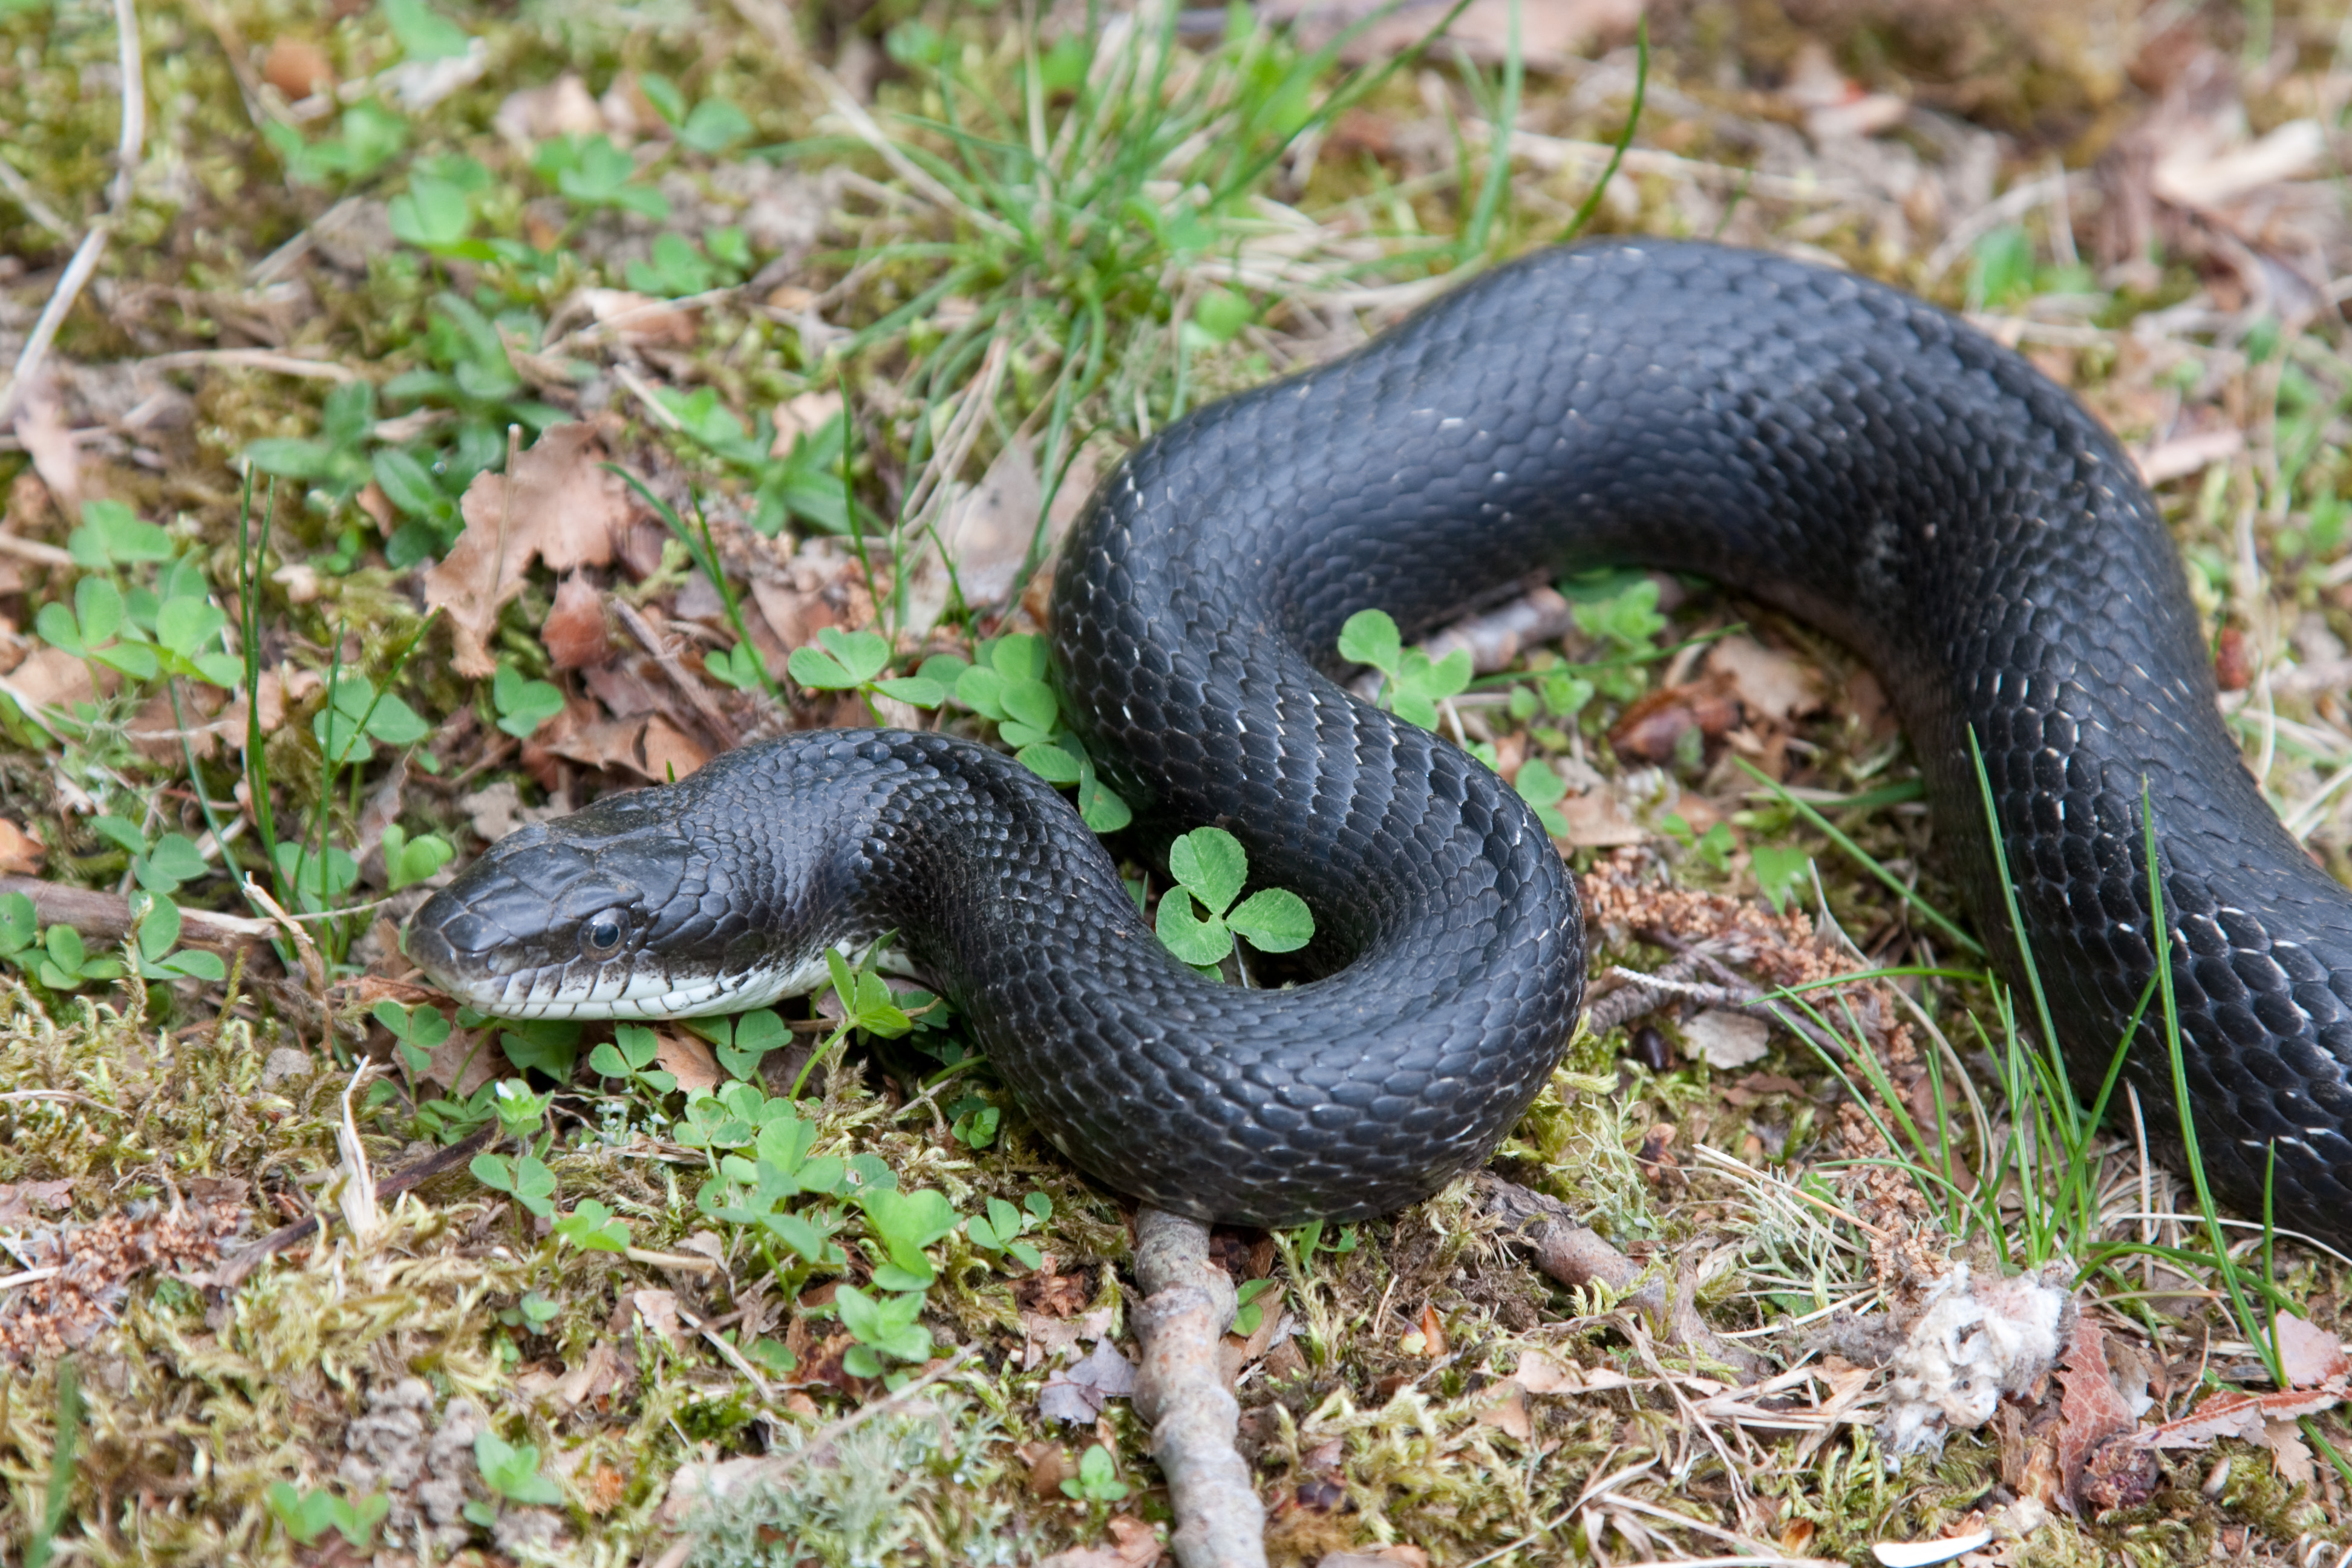 Signs of Summer 5: Several Snakes and a Slug | Ecologist's Notebook